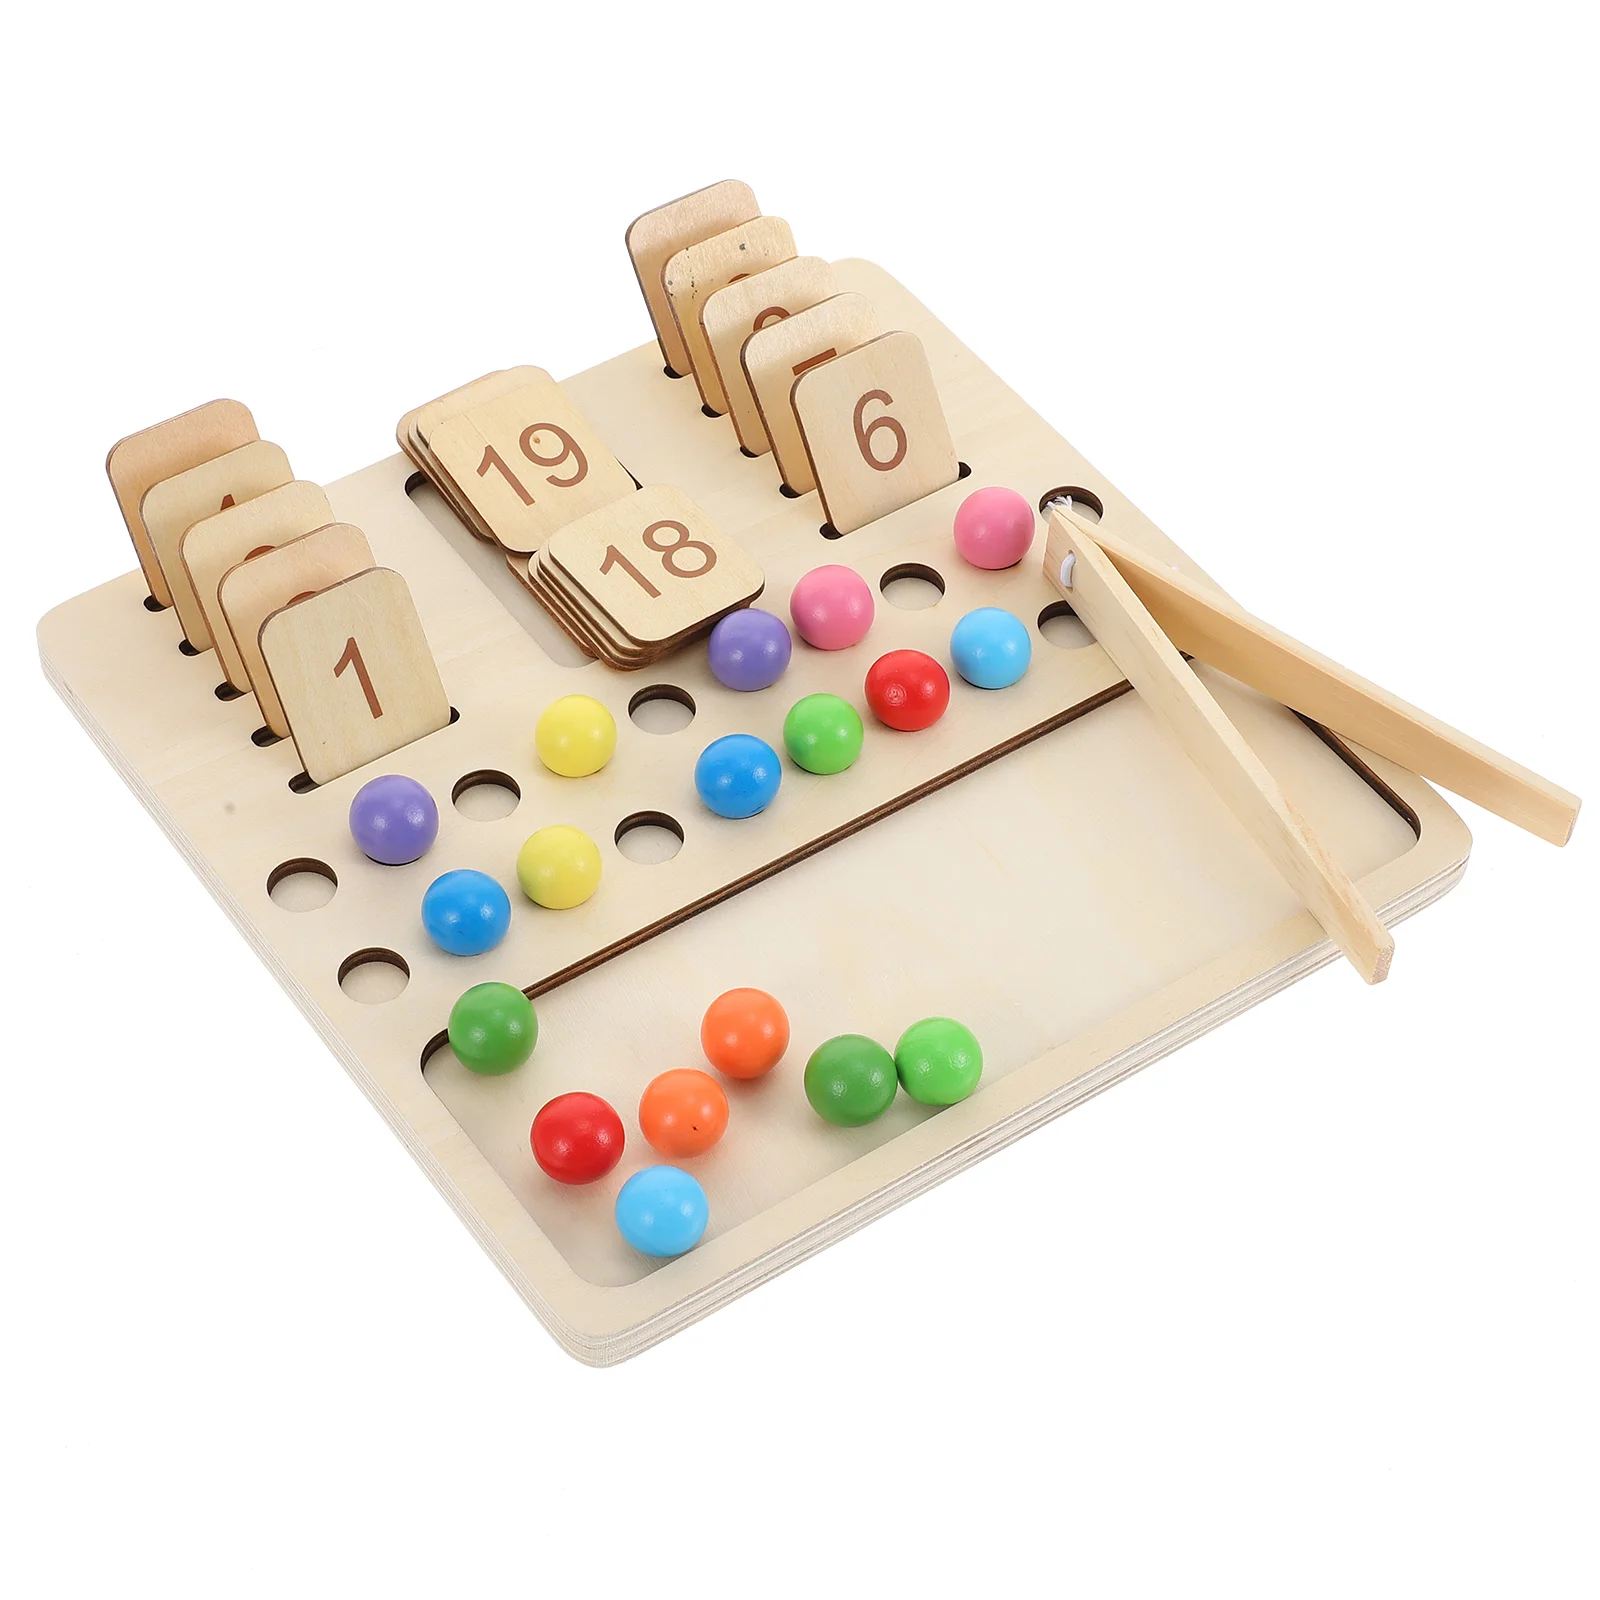 Digital Cognitive Board Toys Wooden Educational Teaching Supplies Playthings Aids Arithmetic Boards Math Learning